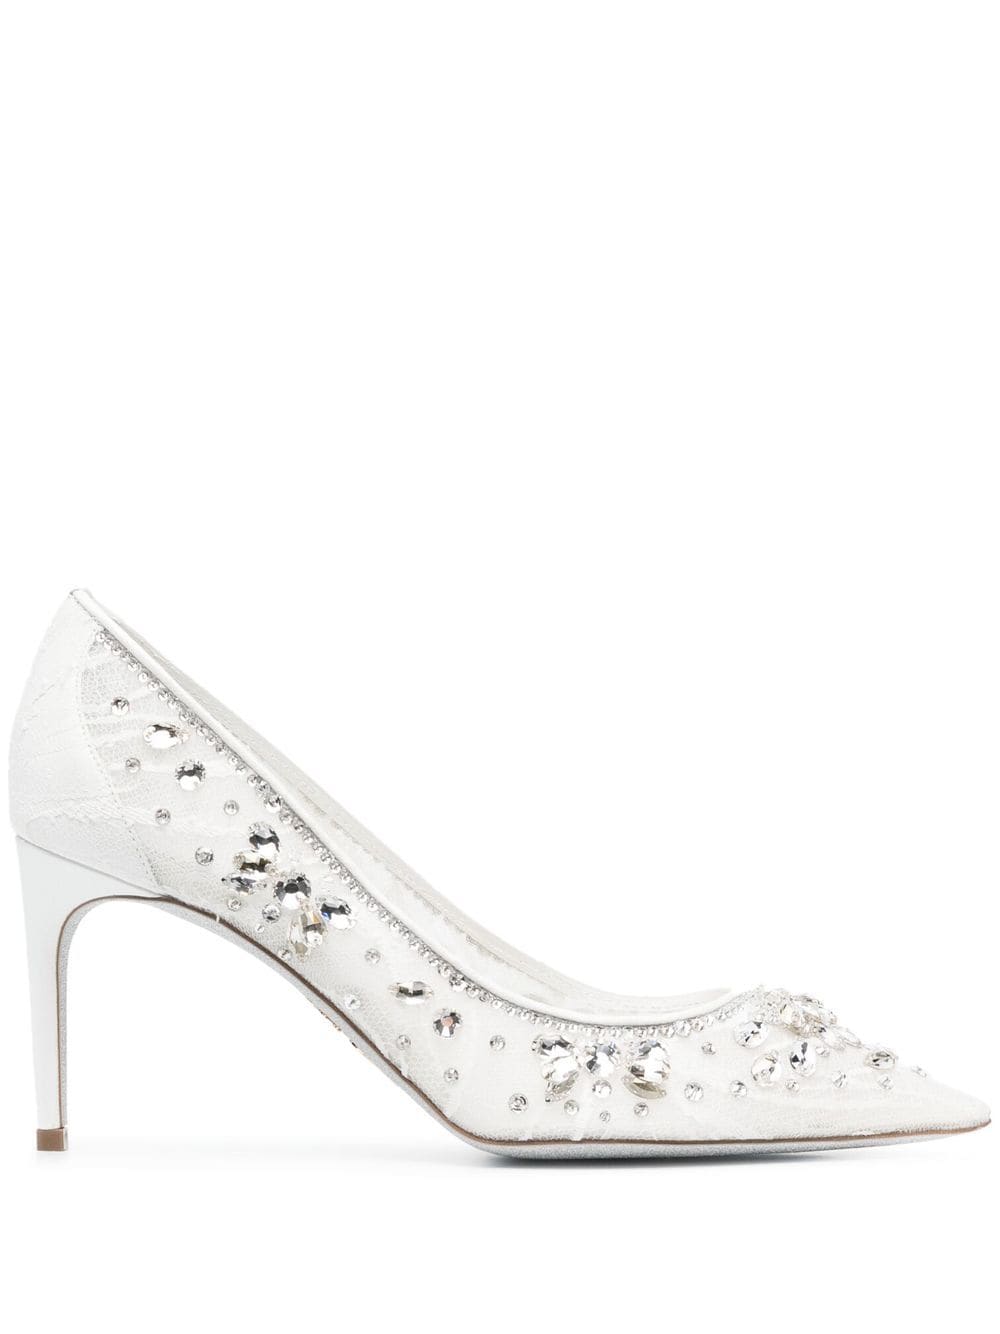 René Caovilla Crystal-embellished Pumps In White